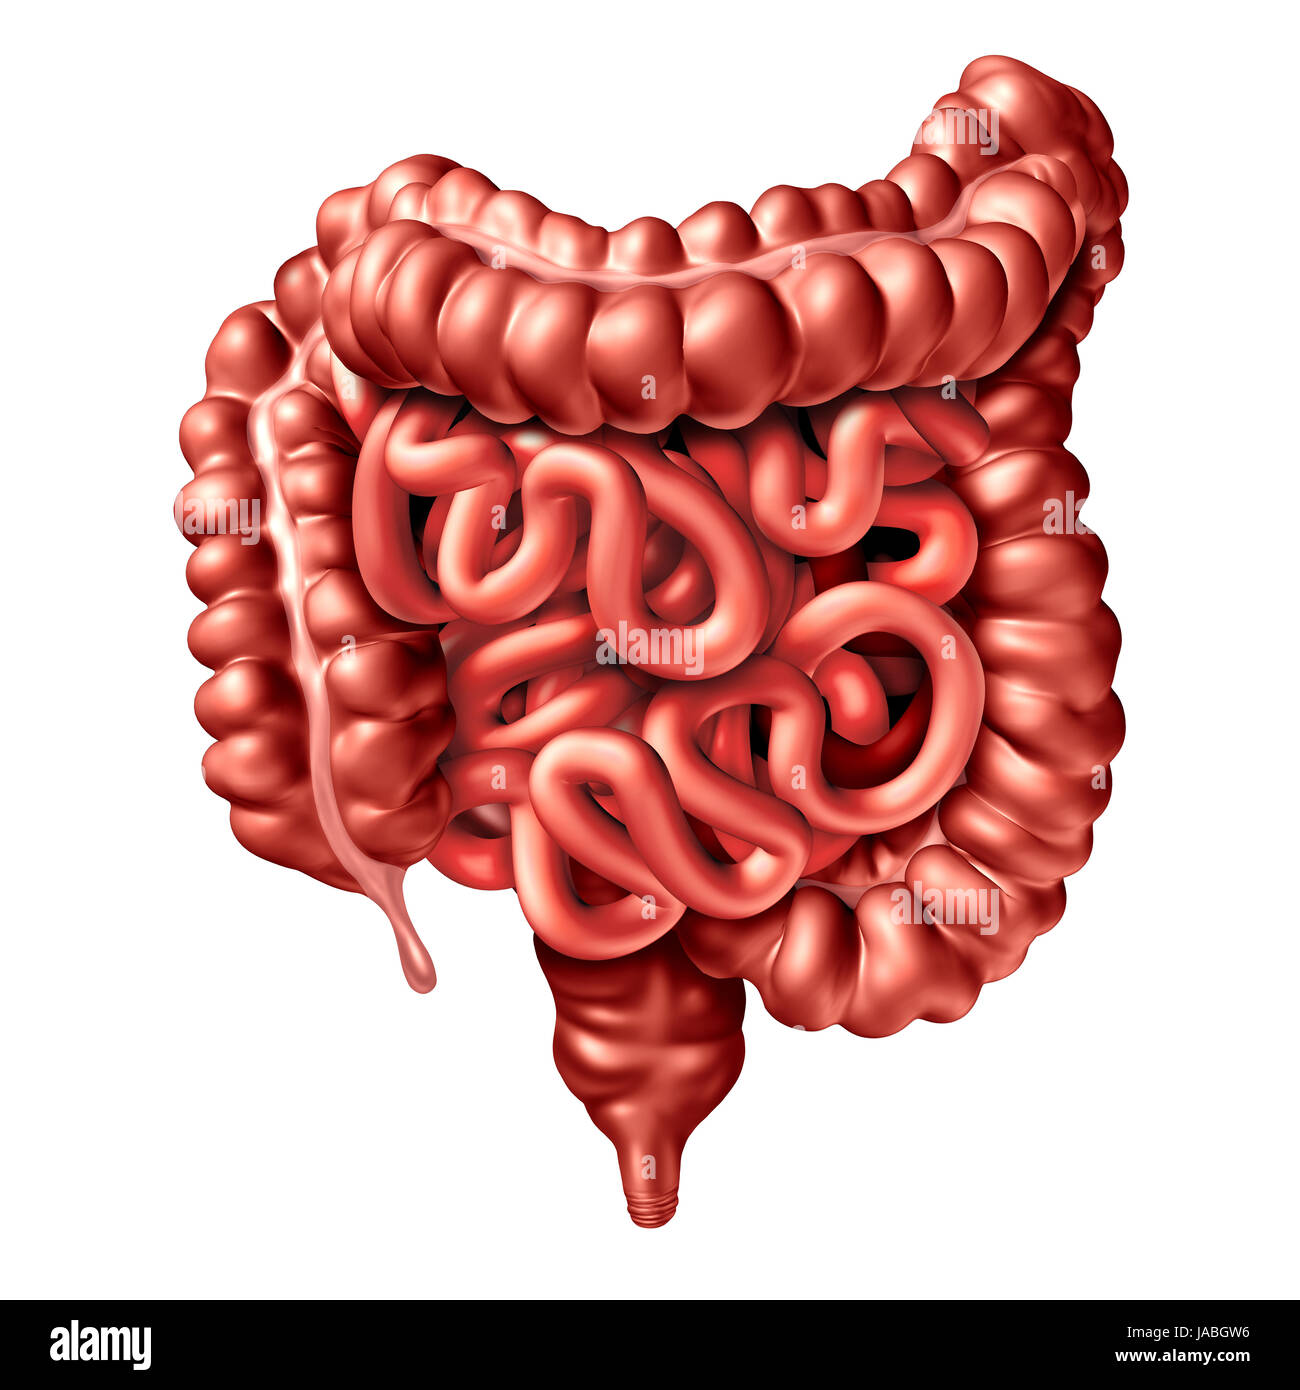 Human Intestine Illustration as a digestive system organ and digestion body part concept with large and small intestines. Stock Photo